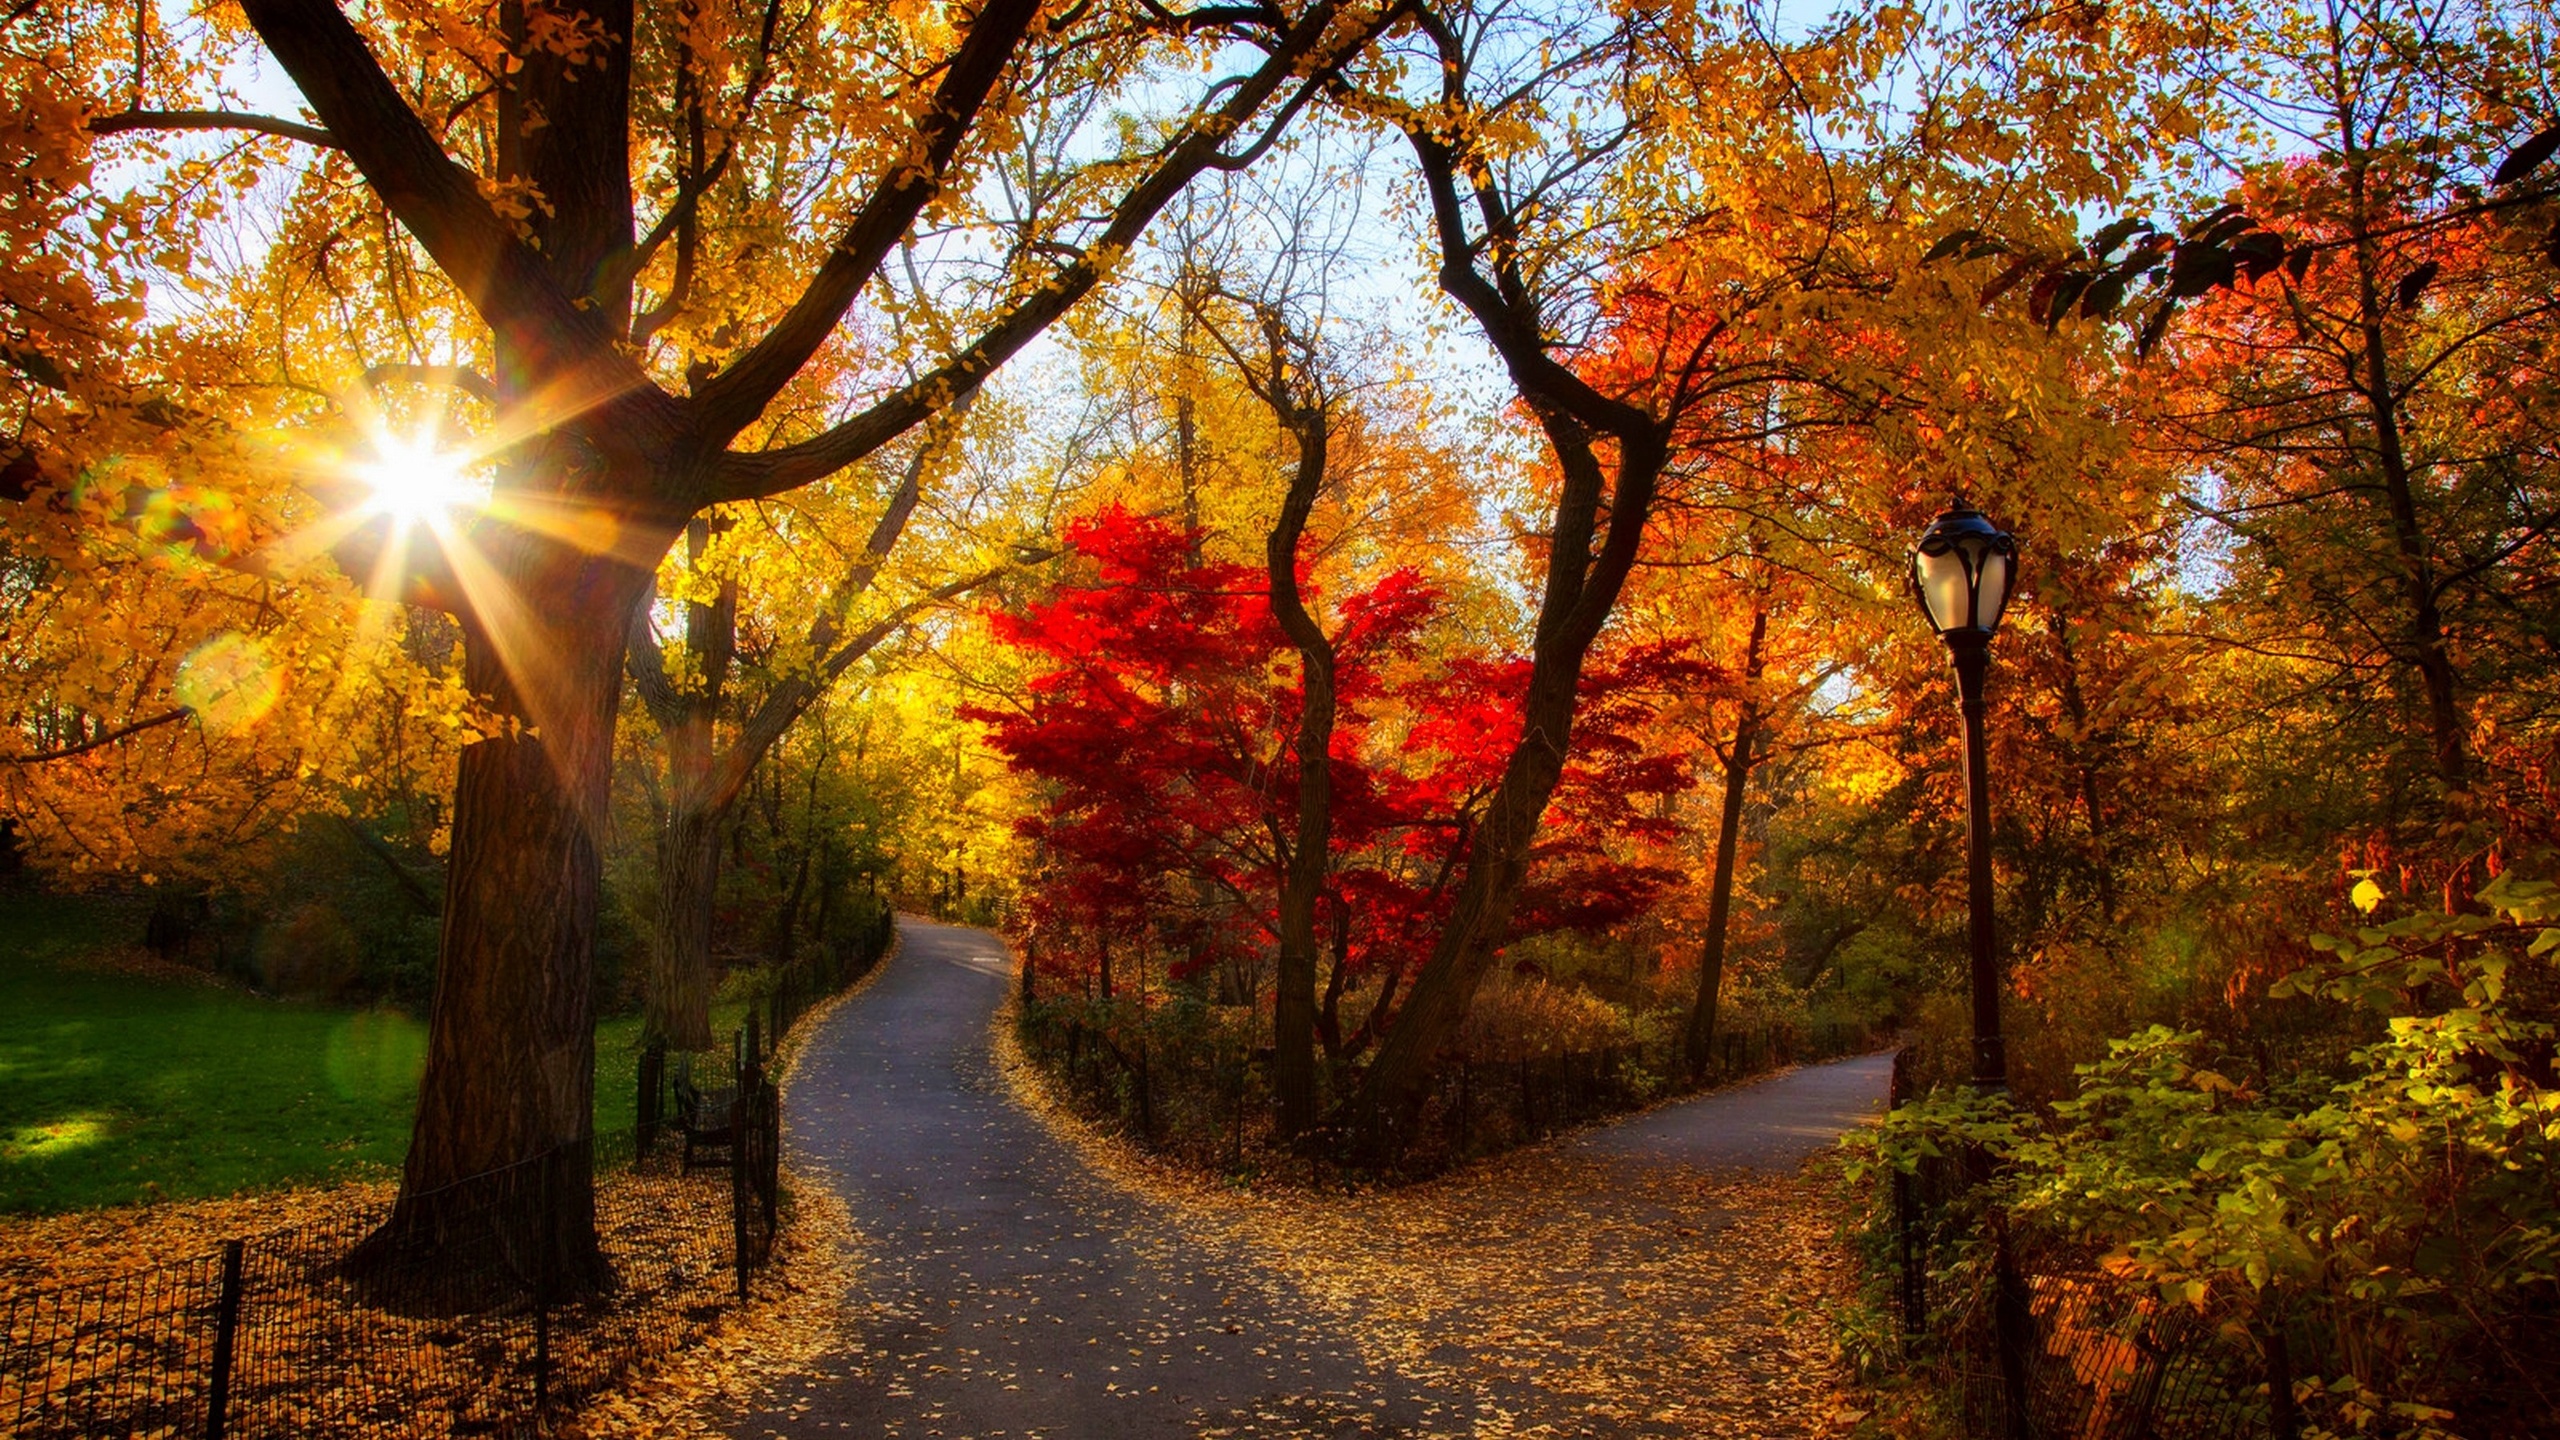 park, road, leaves, fall, leaves, path, sunset, colors, trees, walk, autumn, forest, park, forest, nature, trees, autumn, colorful, road, nature, sunset